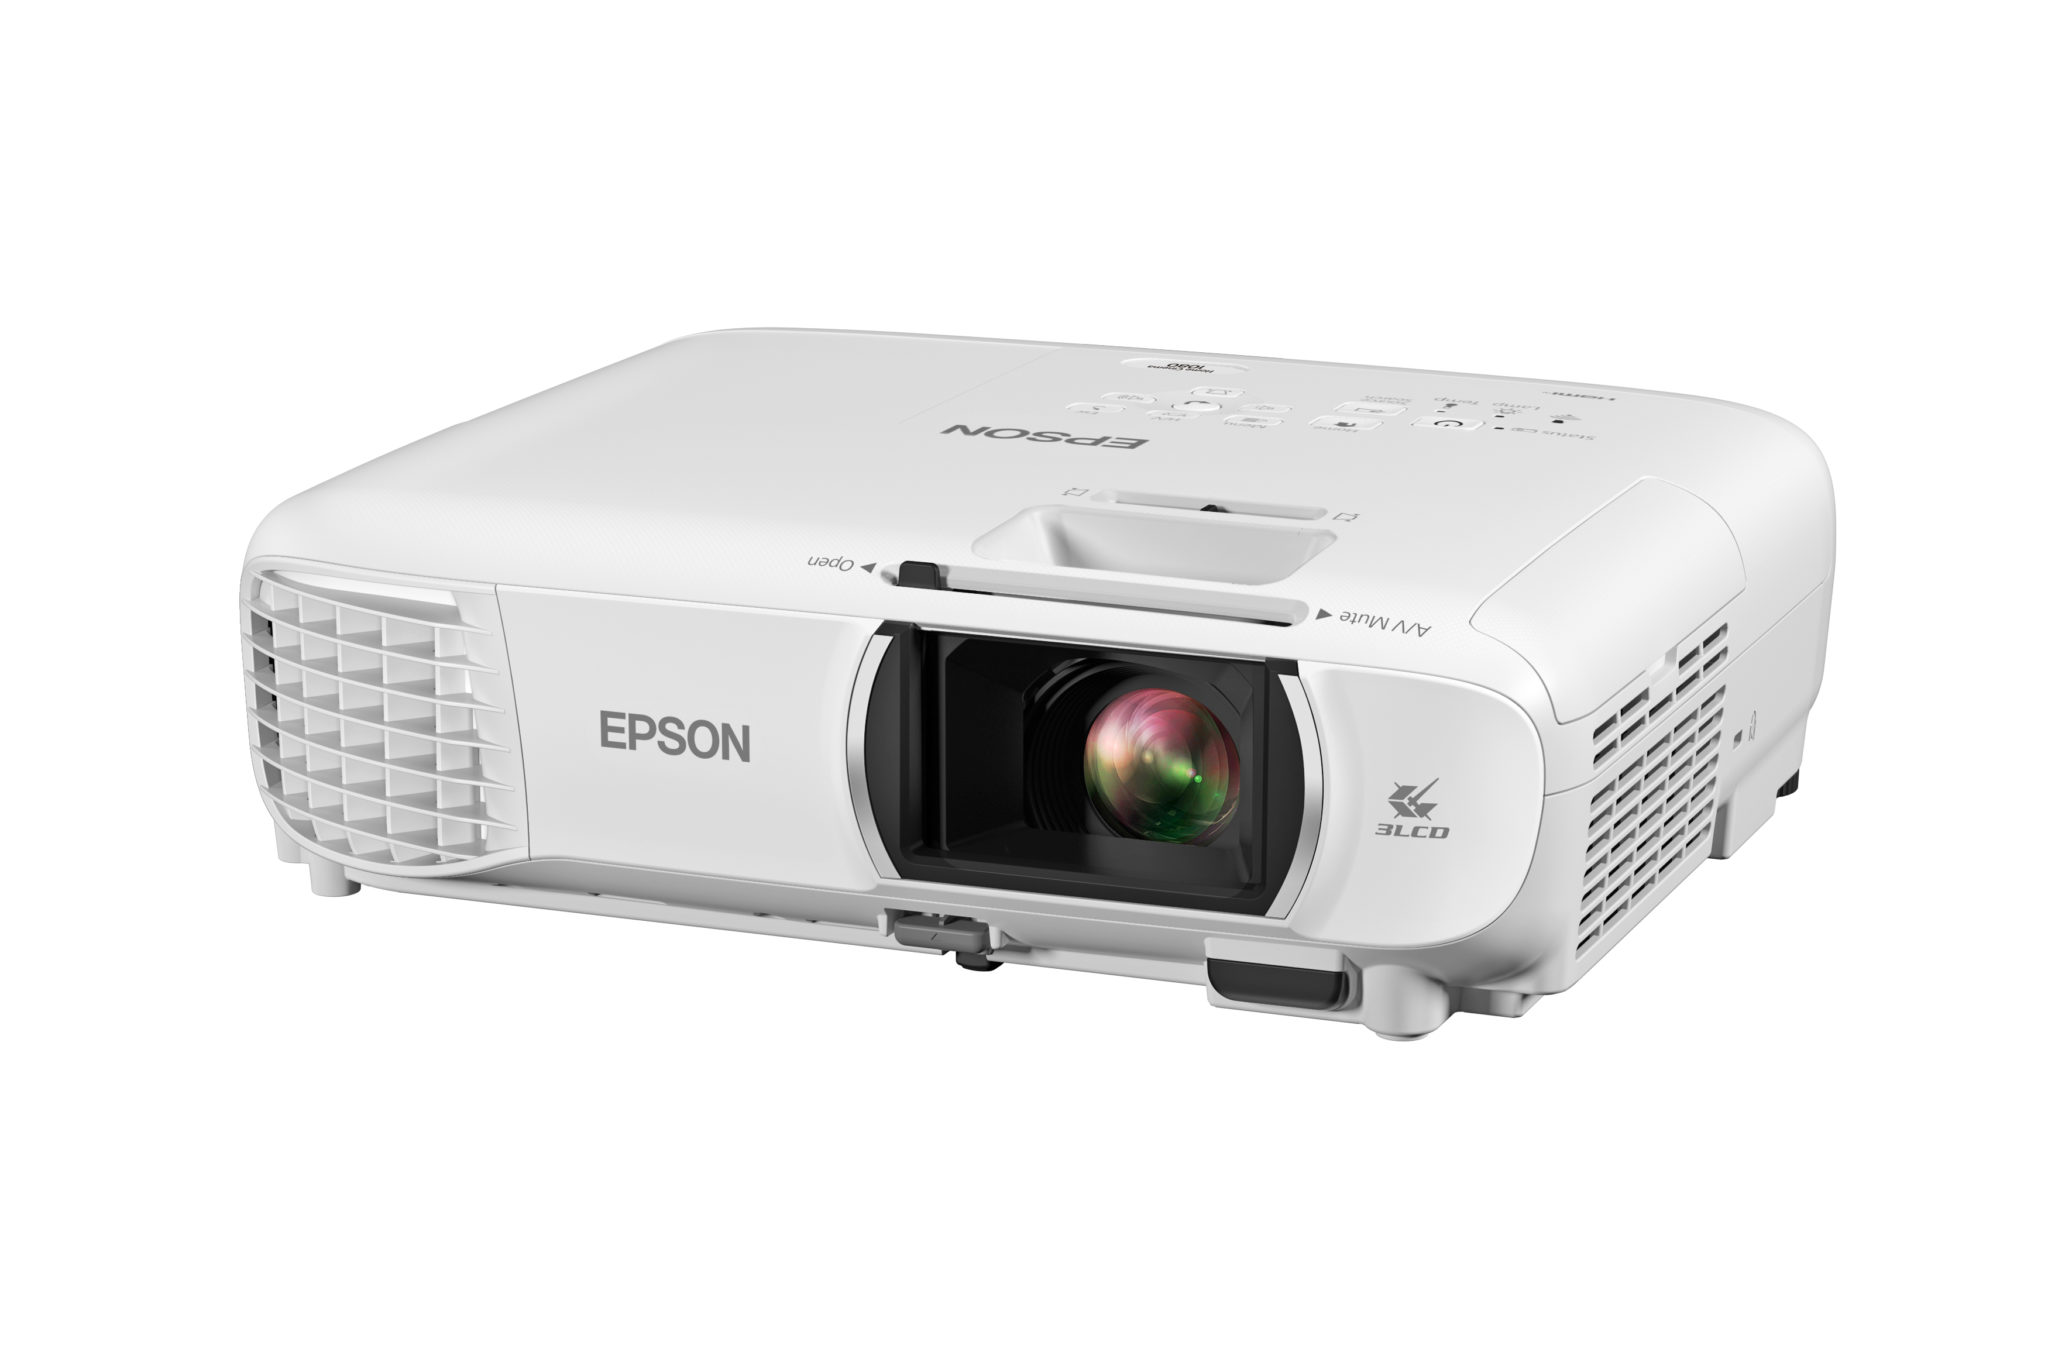 Epson Debuts Four New Home Cinema Models